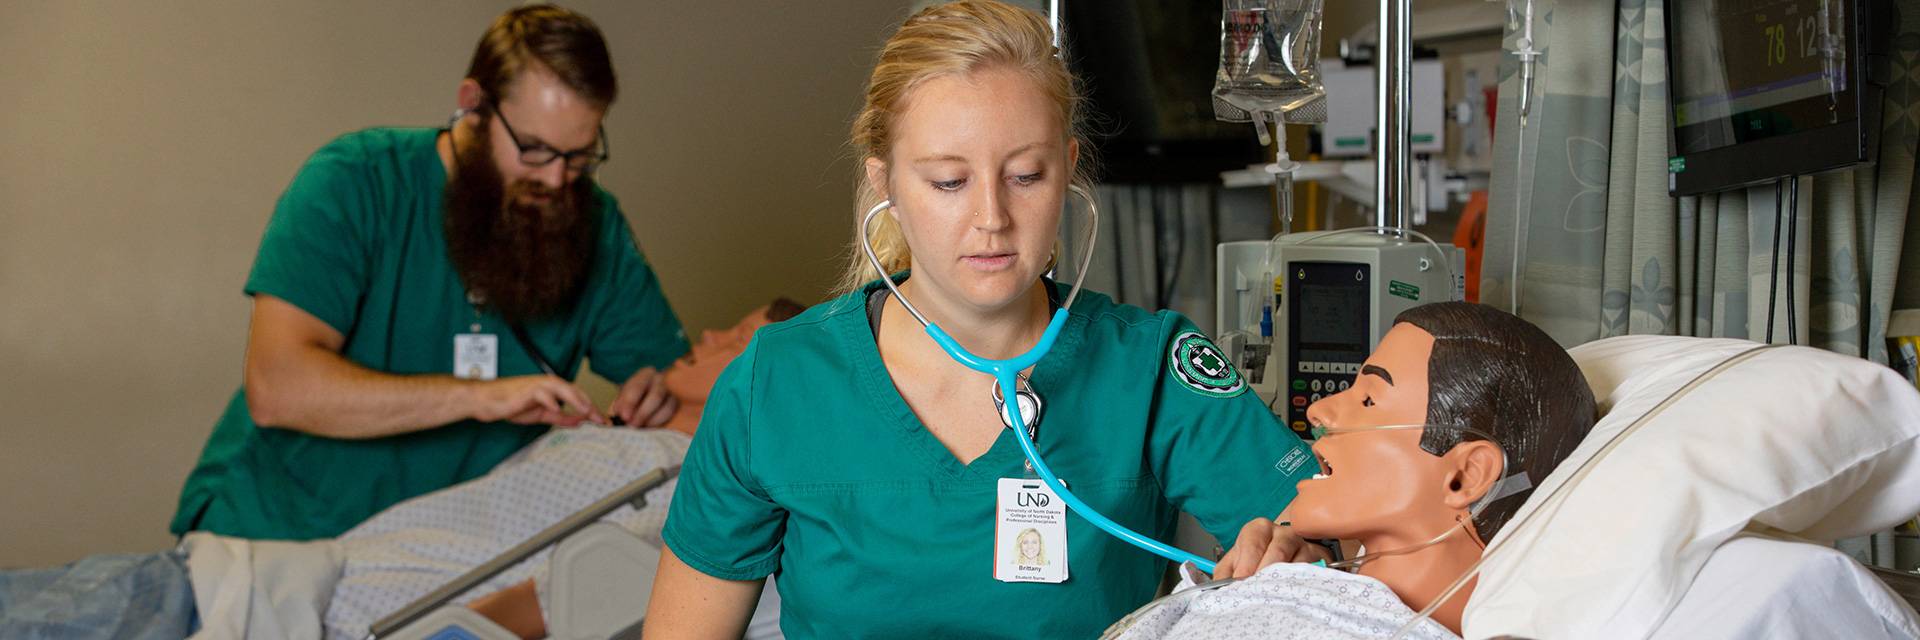 two nursing students with simulators